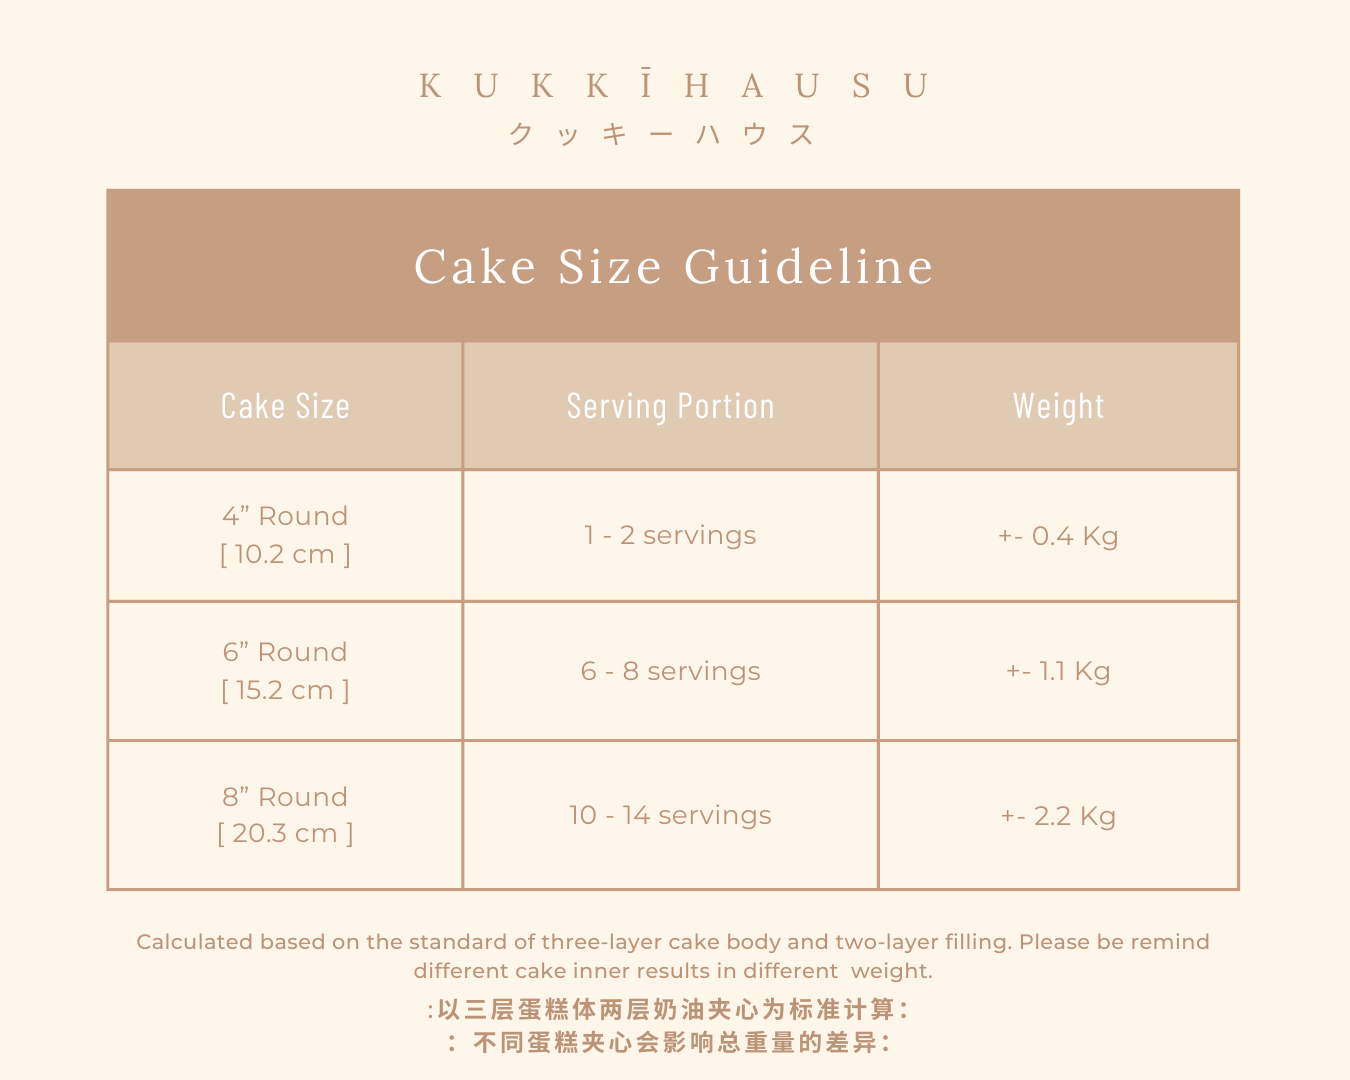 Cake size guideline